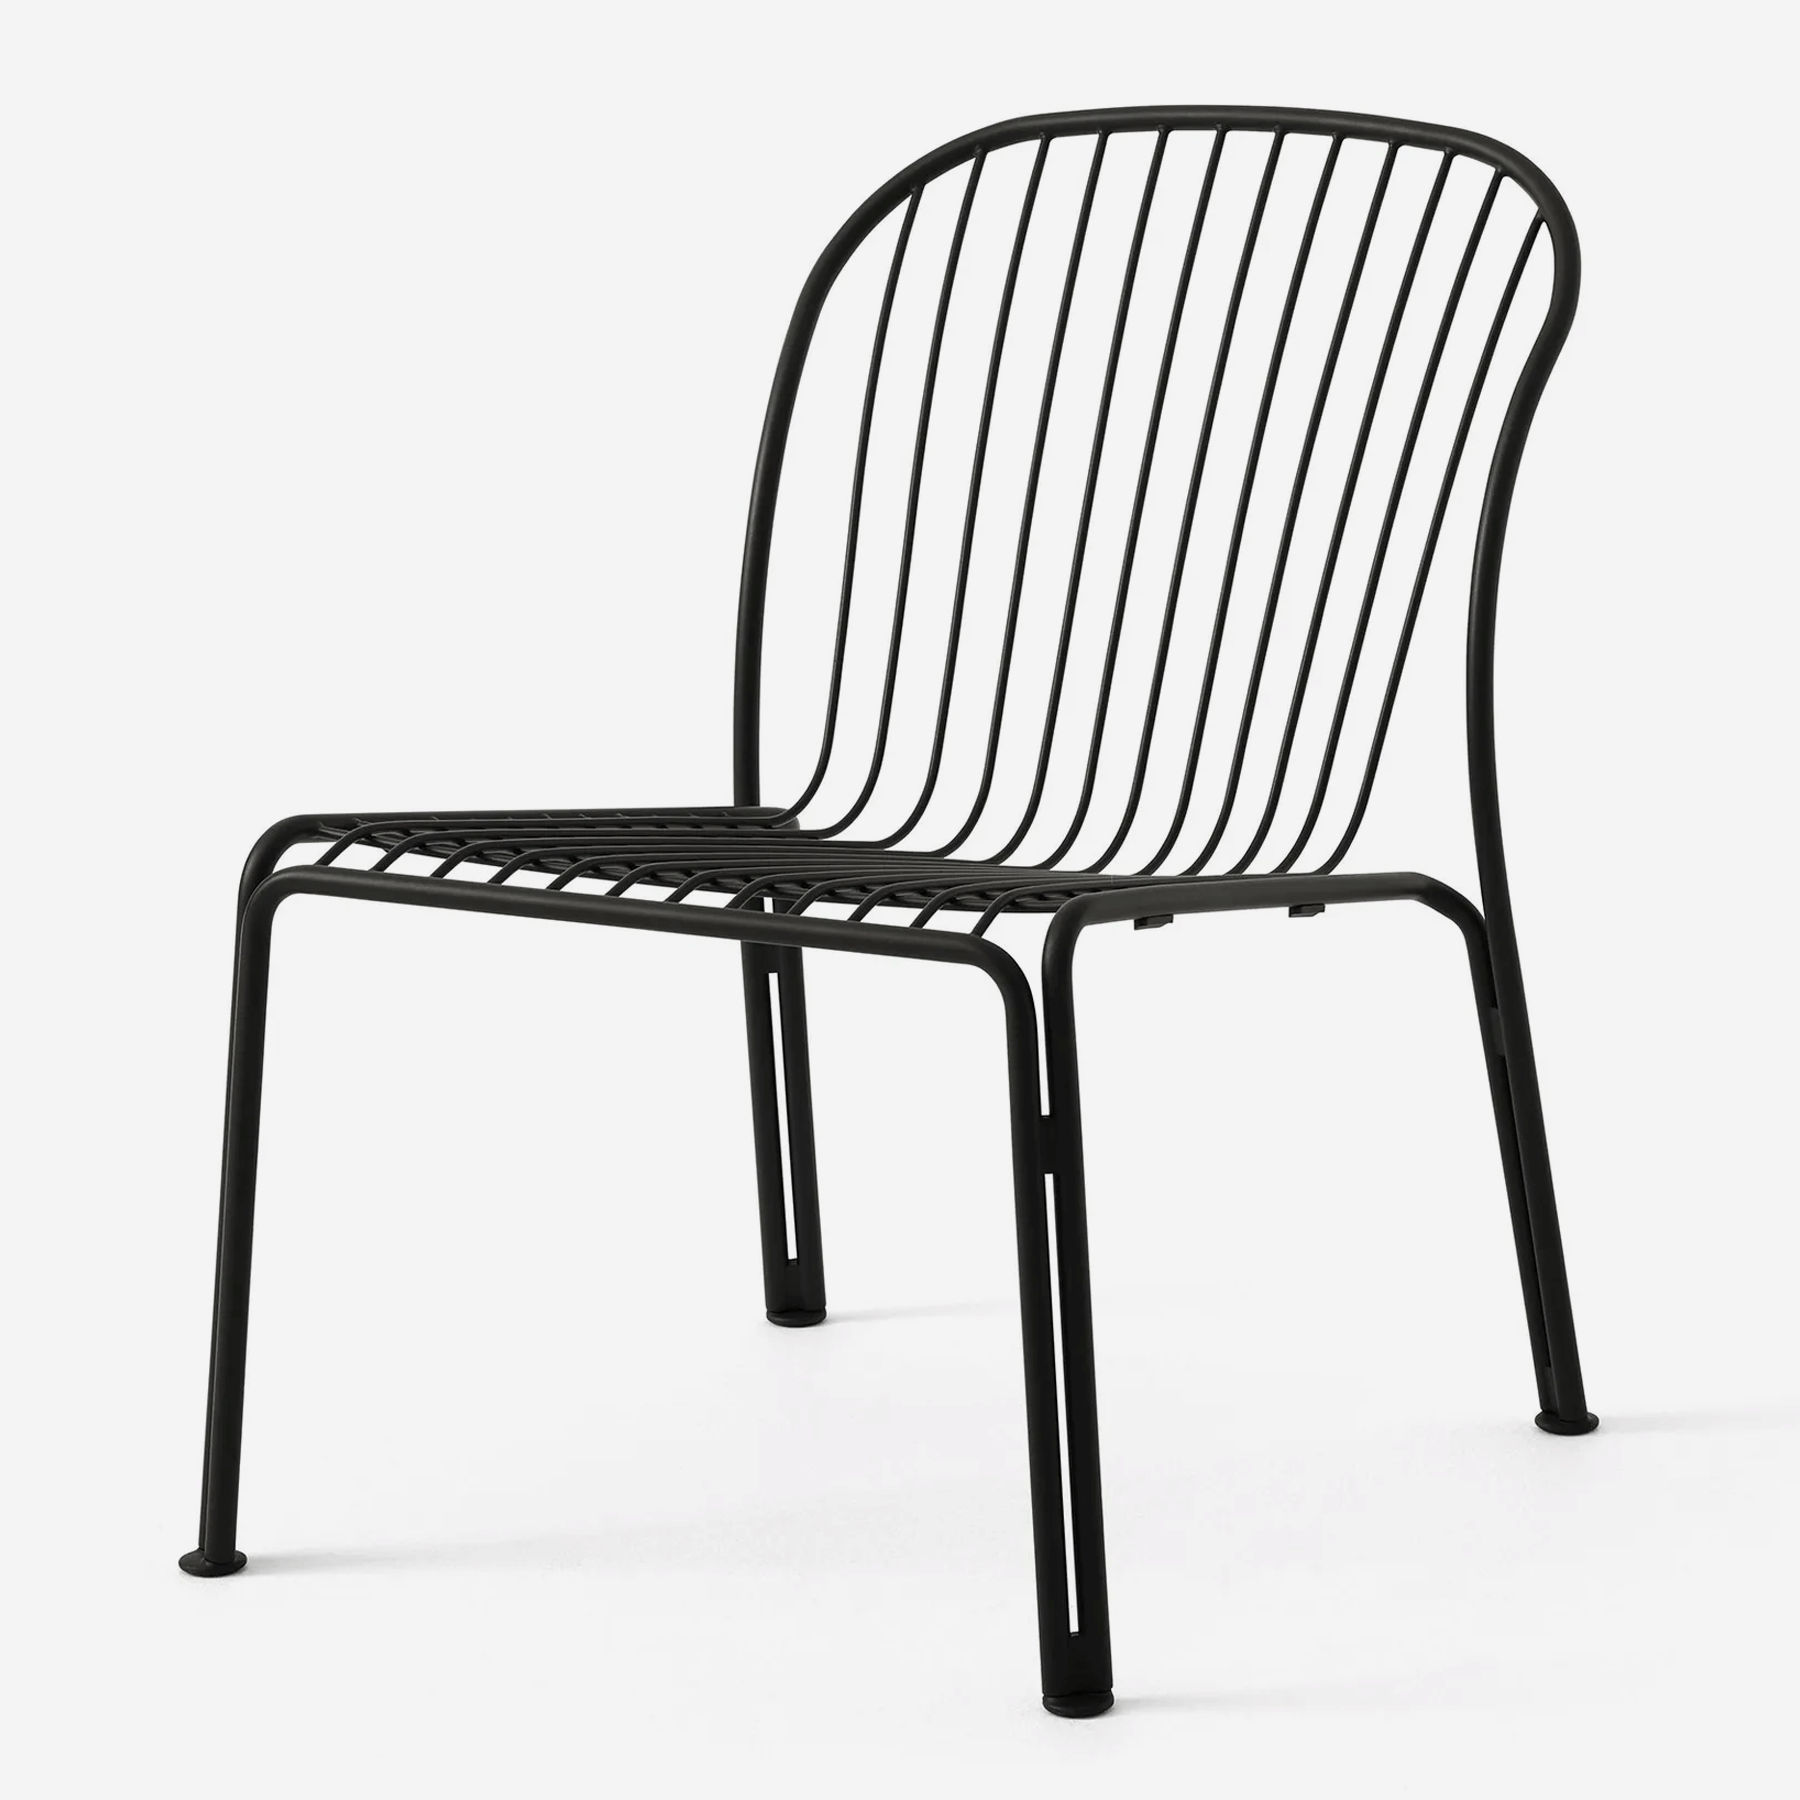 Thorvald SC100 Outdoor Lounge Chair